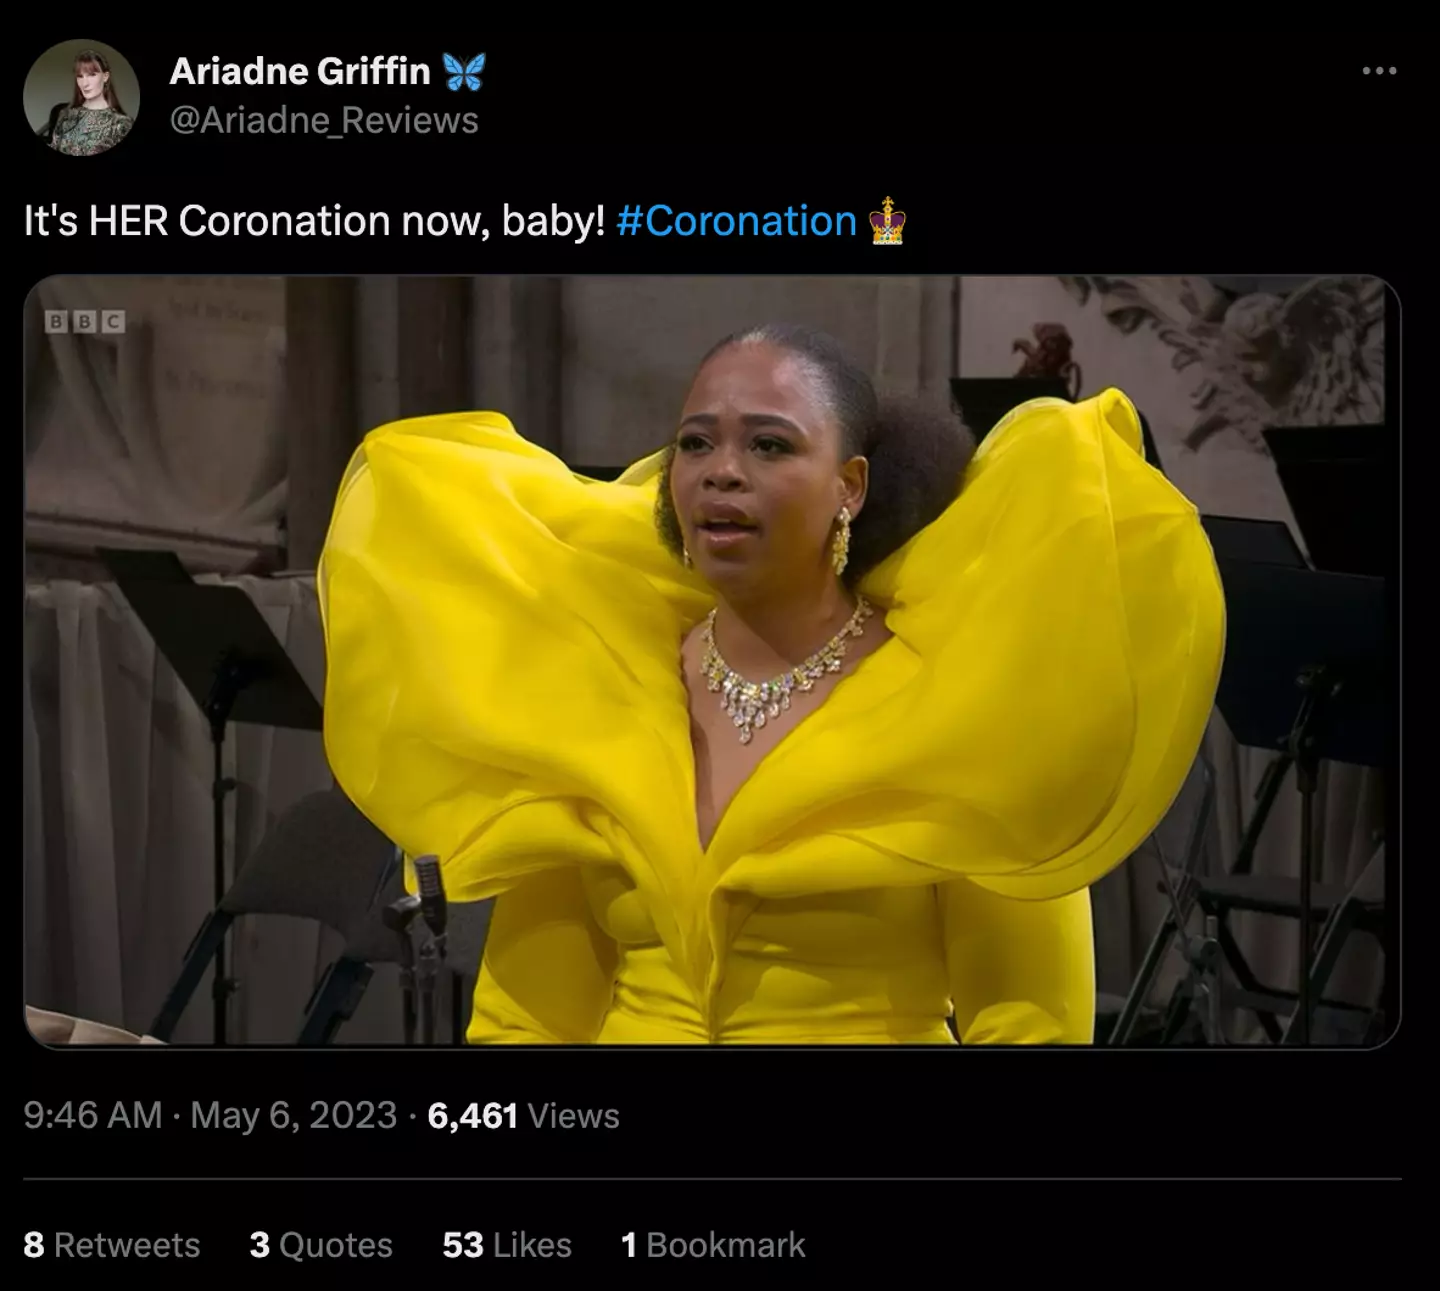 Viewers flocked to social media in awe of the South African opera singer.